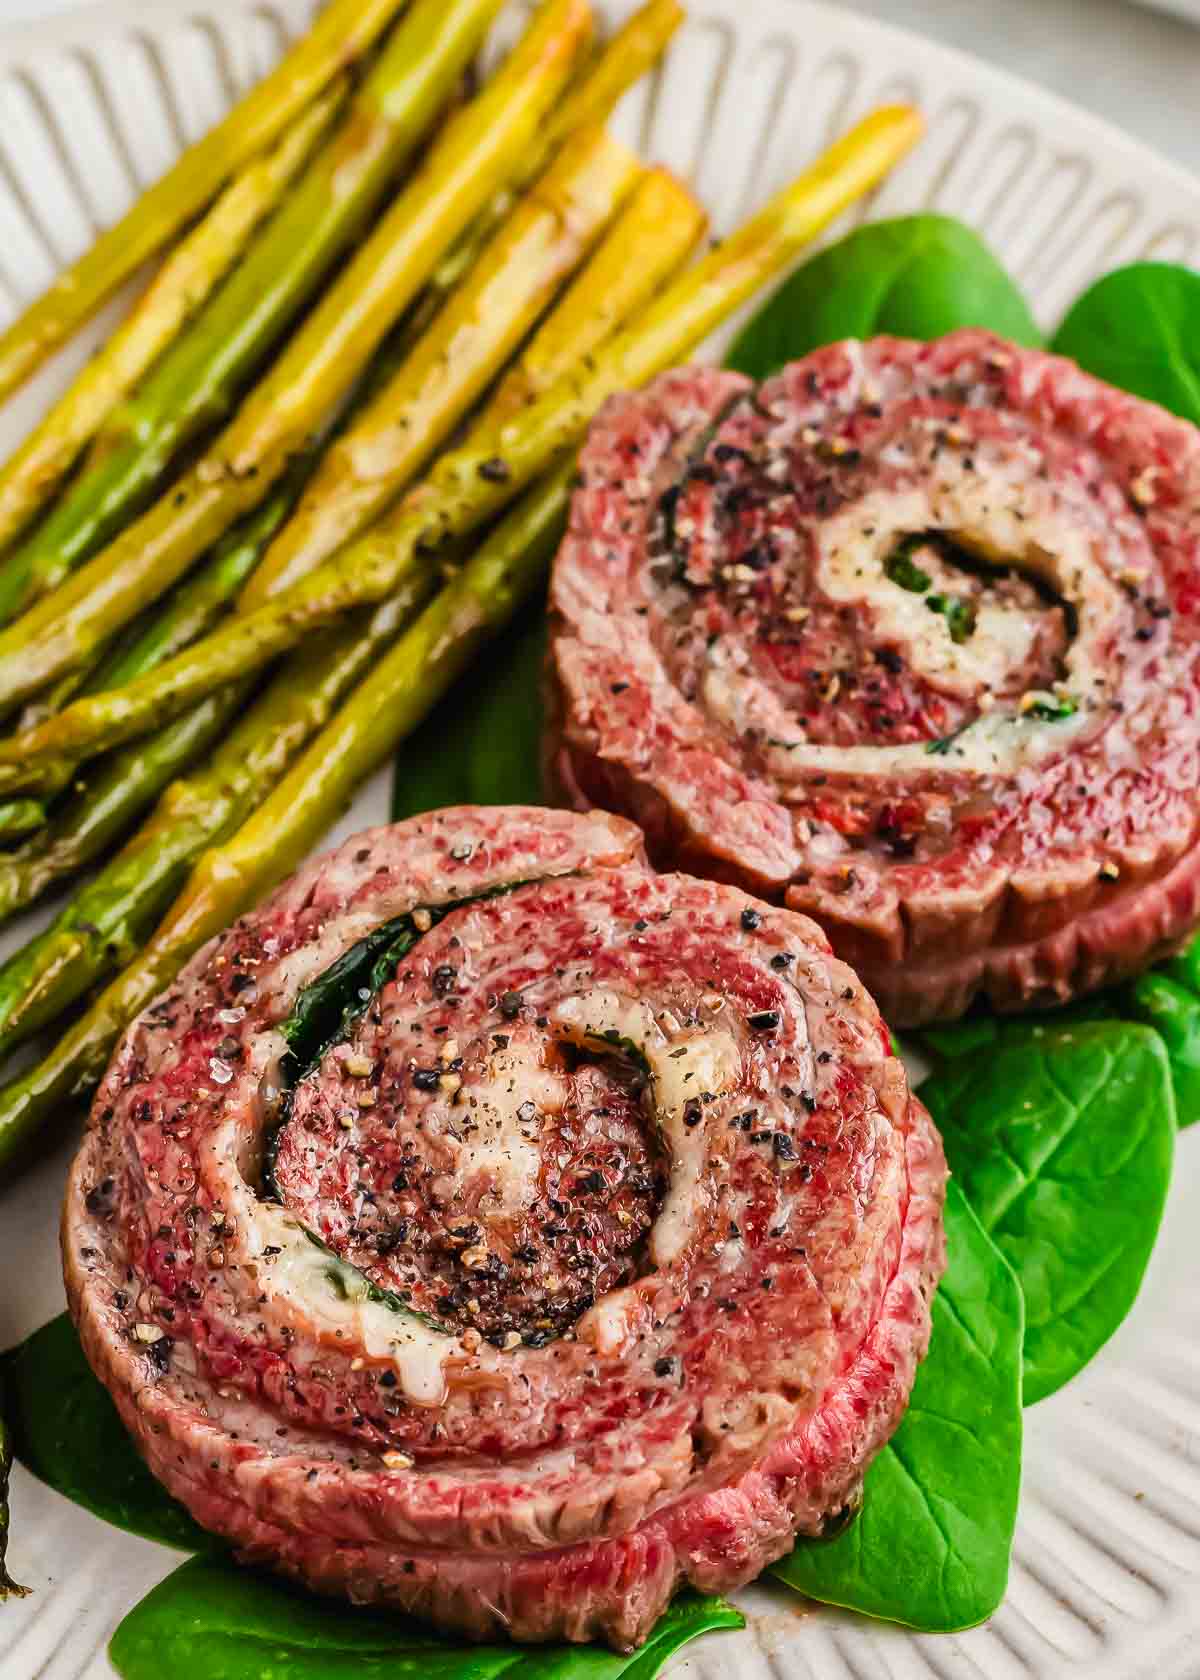 Cooked pinwheel steaks and asparagus served on a bed of spinach leaves.